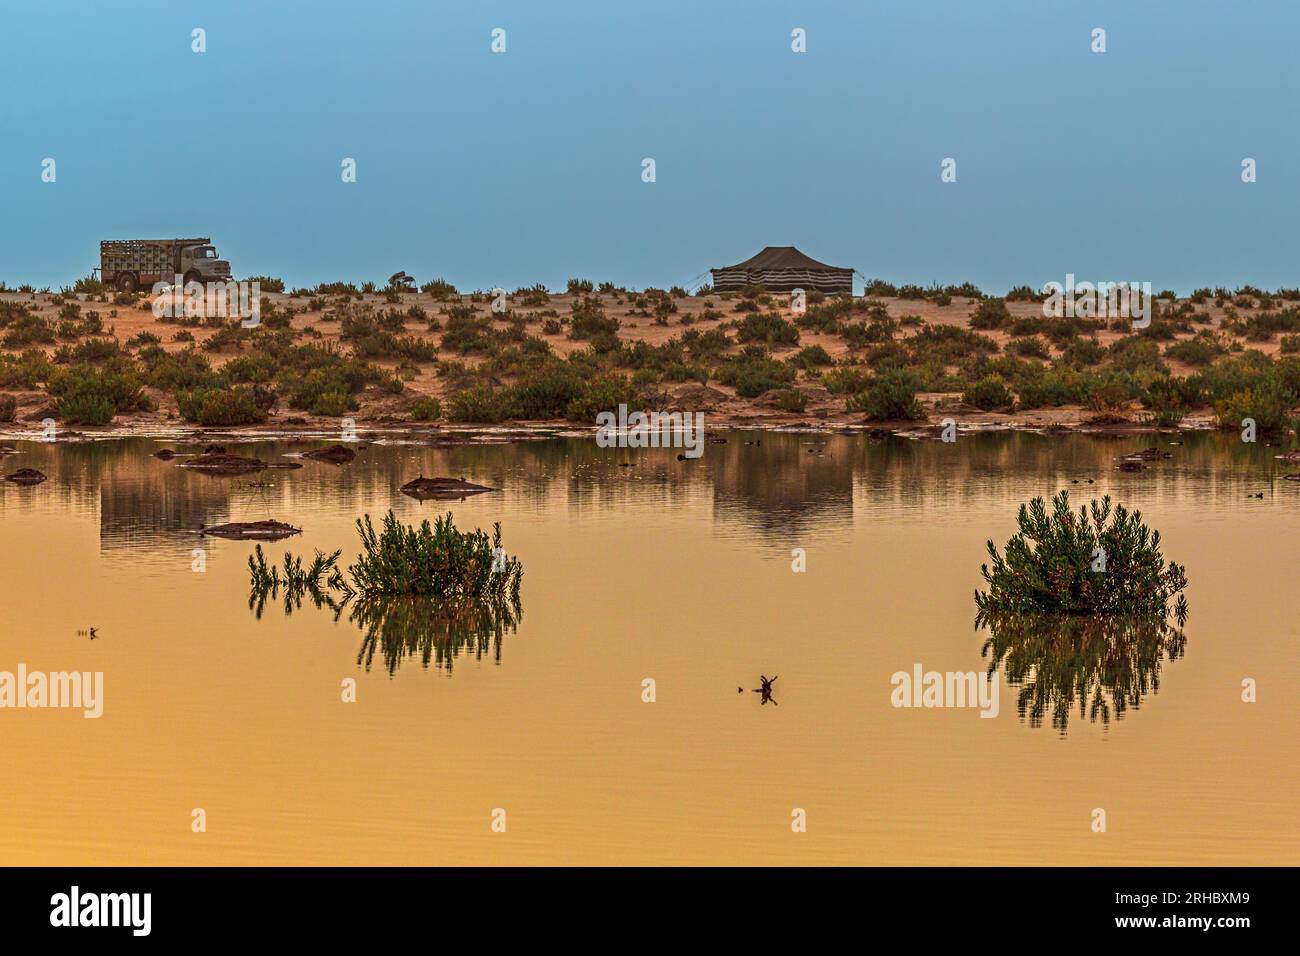 Tent and truck parked in a flooded desert landscape after rains, Saudi Arabia Stock Photo